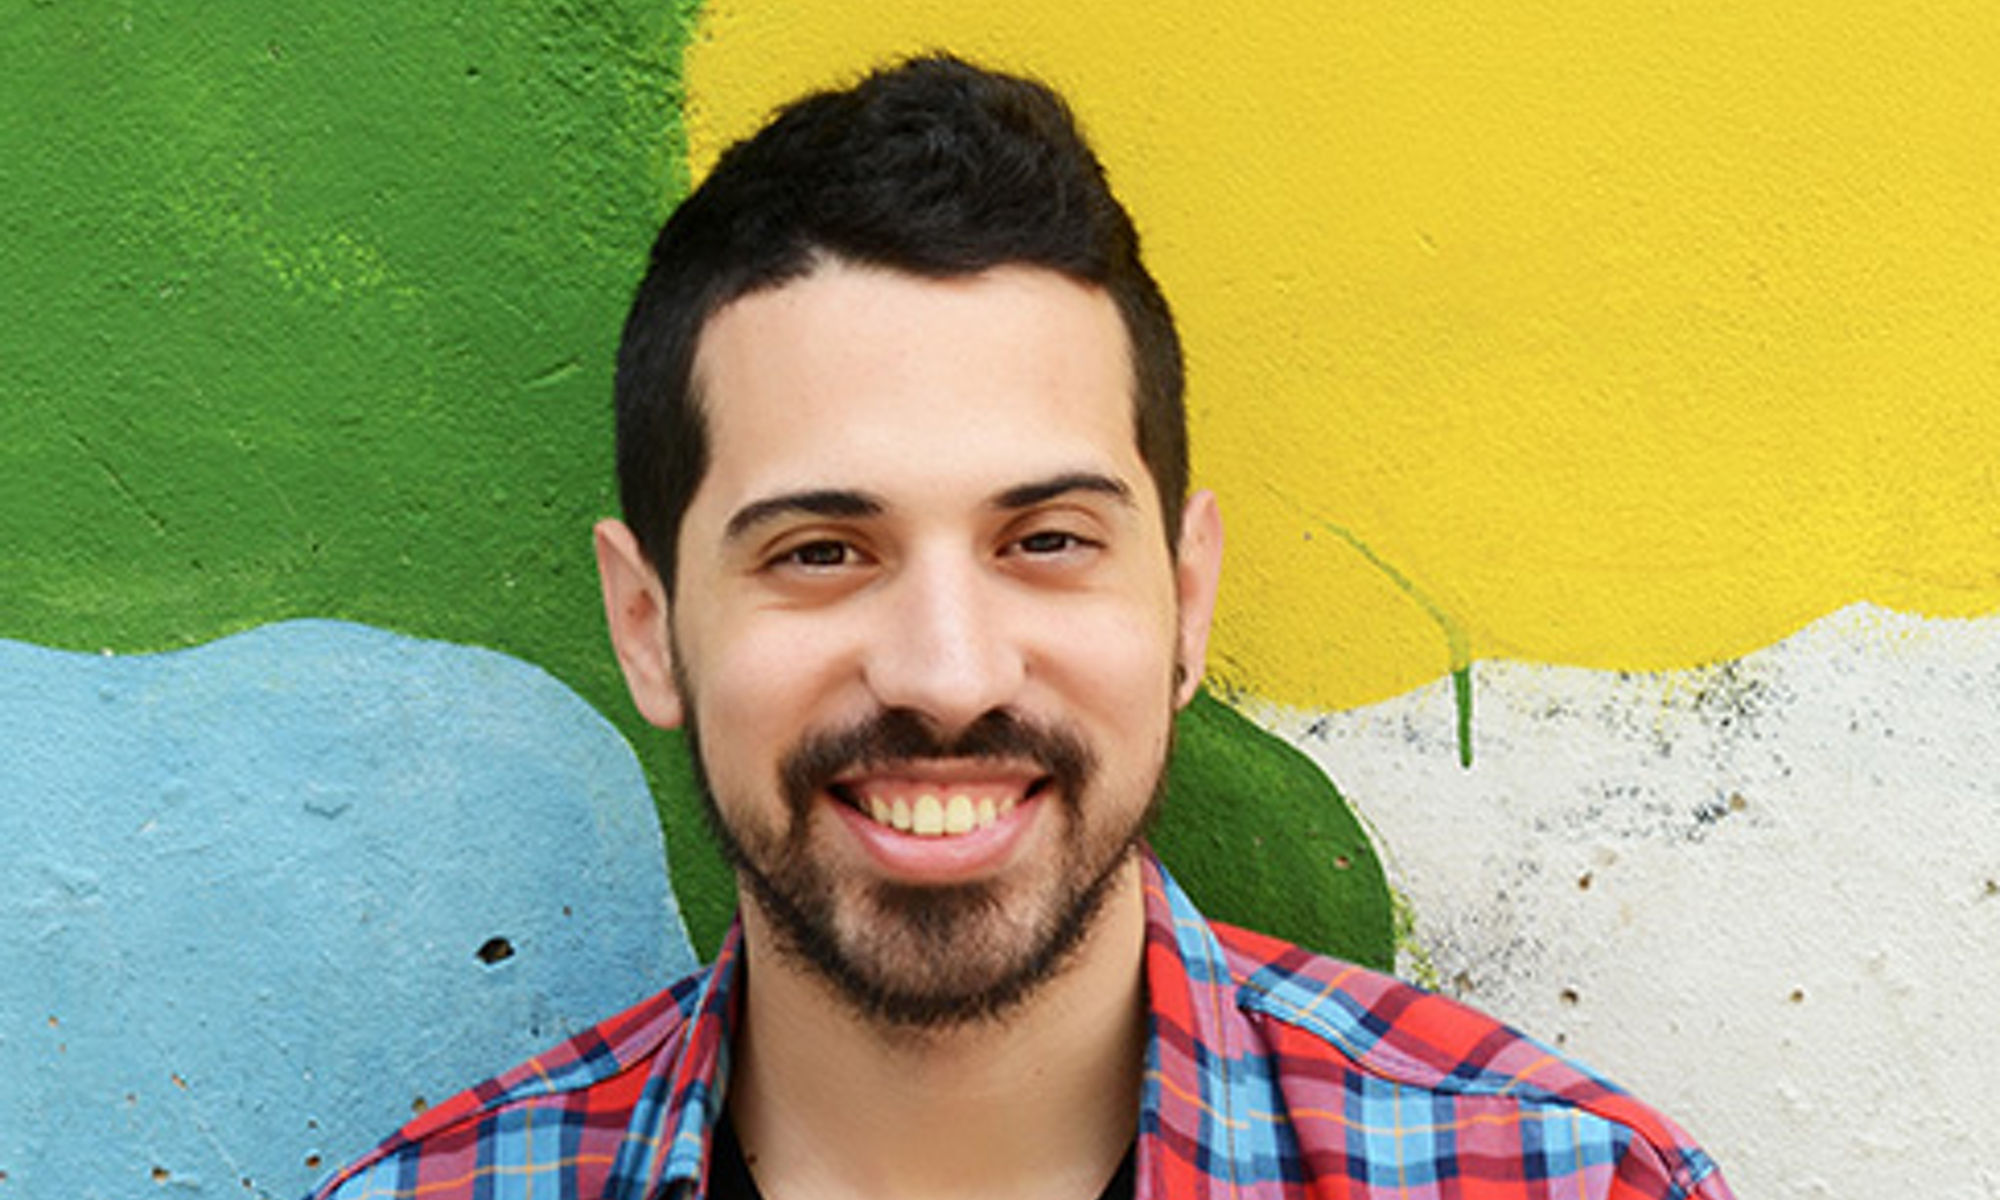 A man with a goatee smiling in front of a multi-color wall.